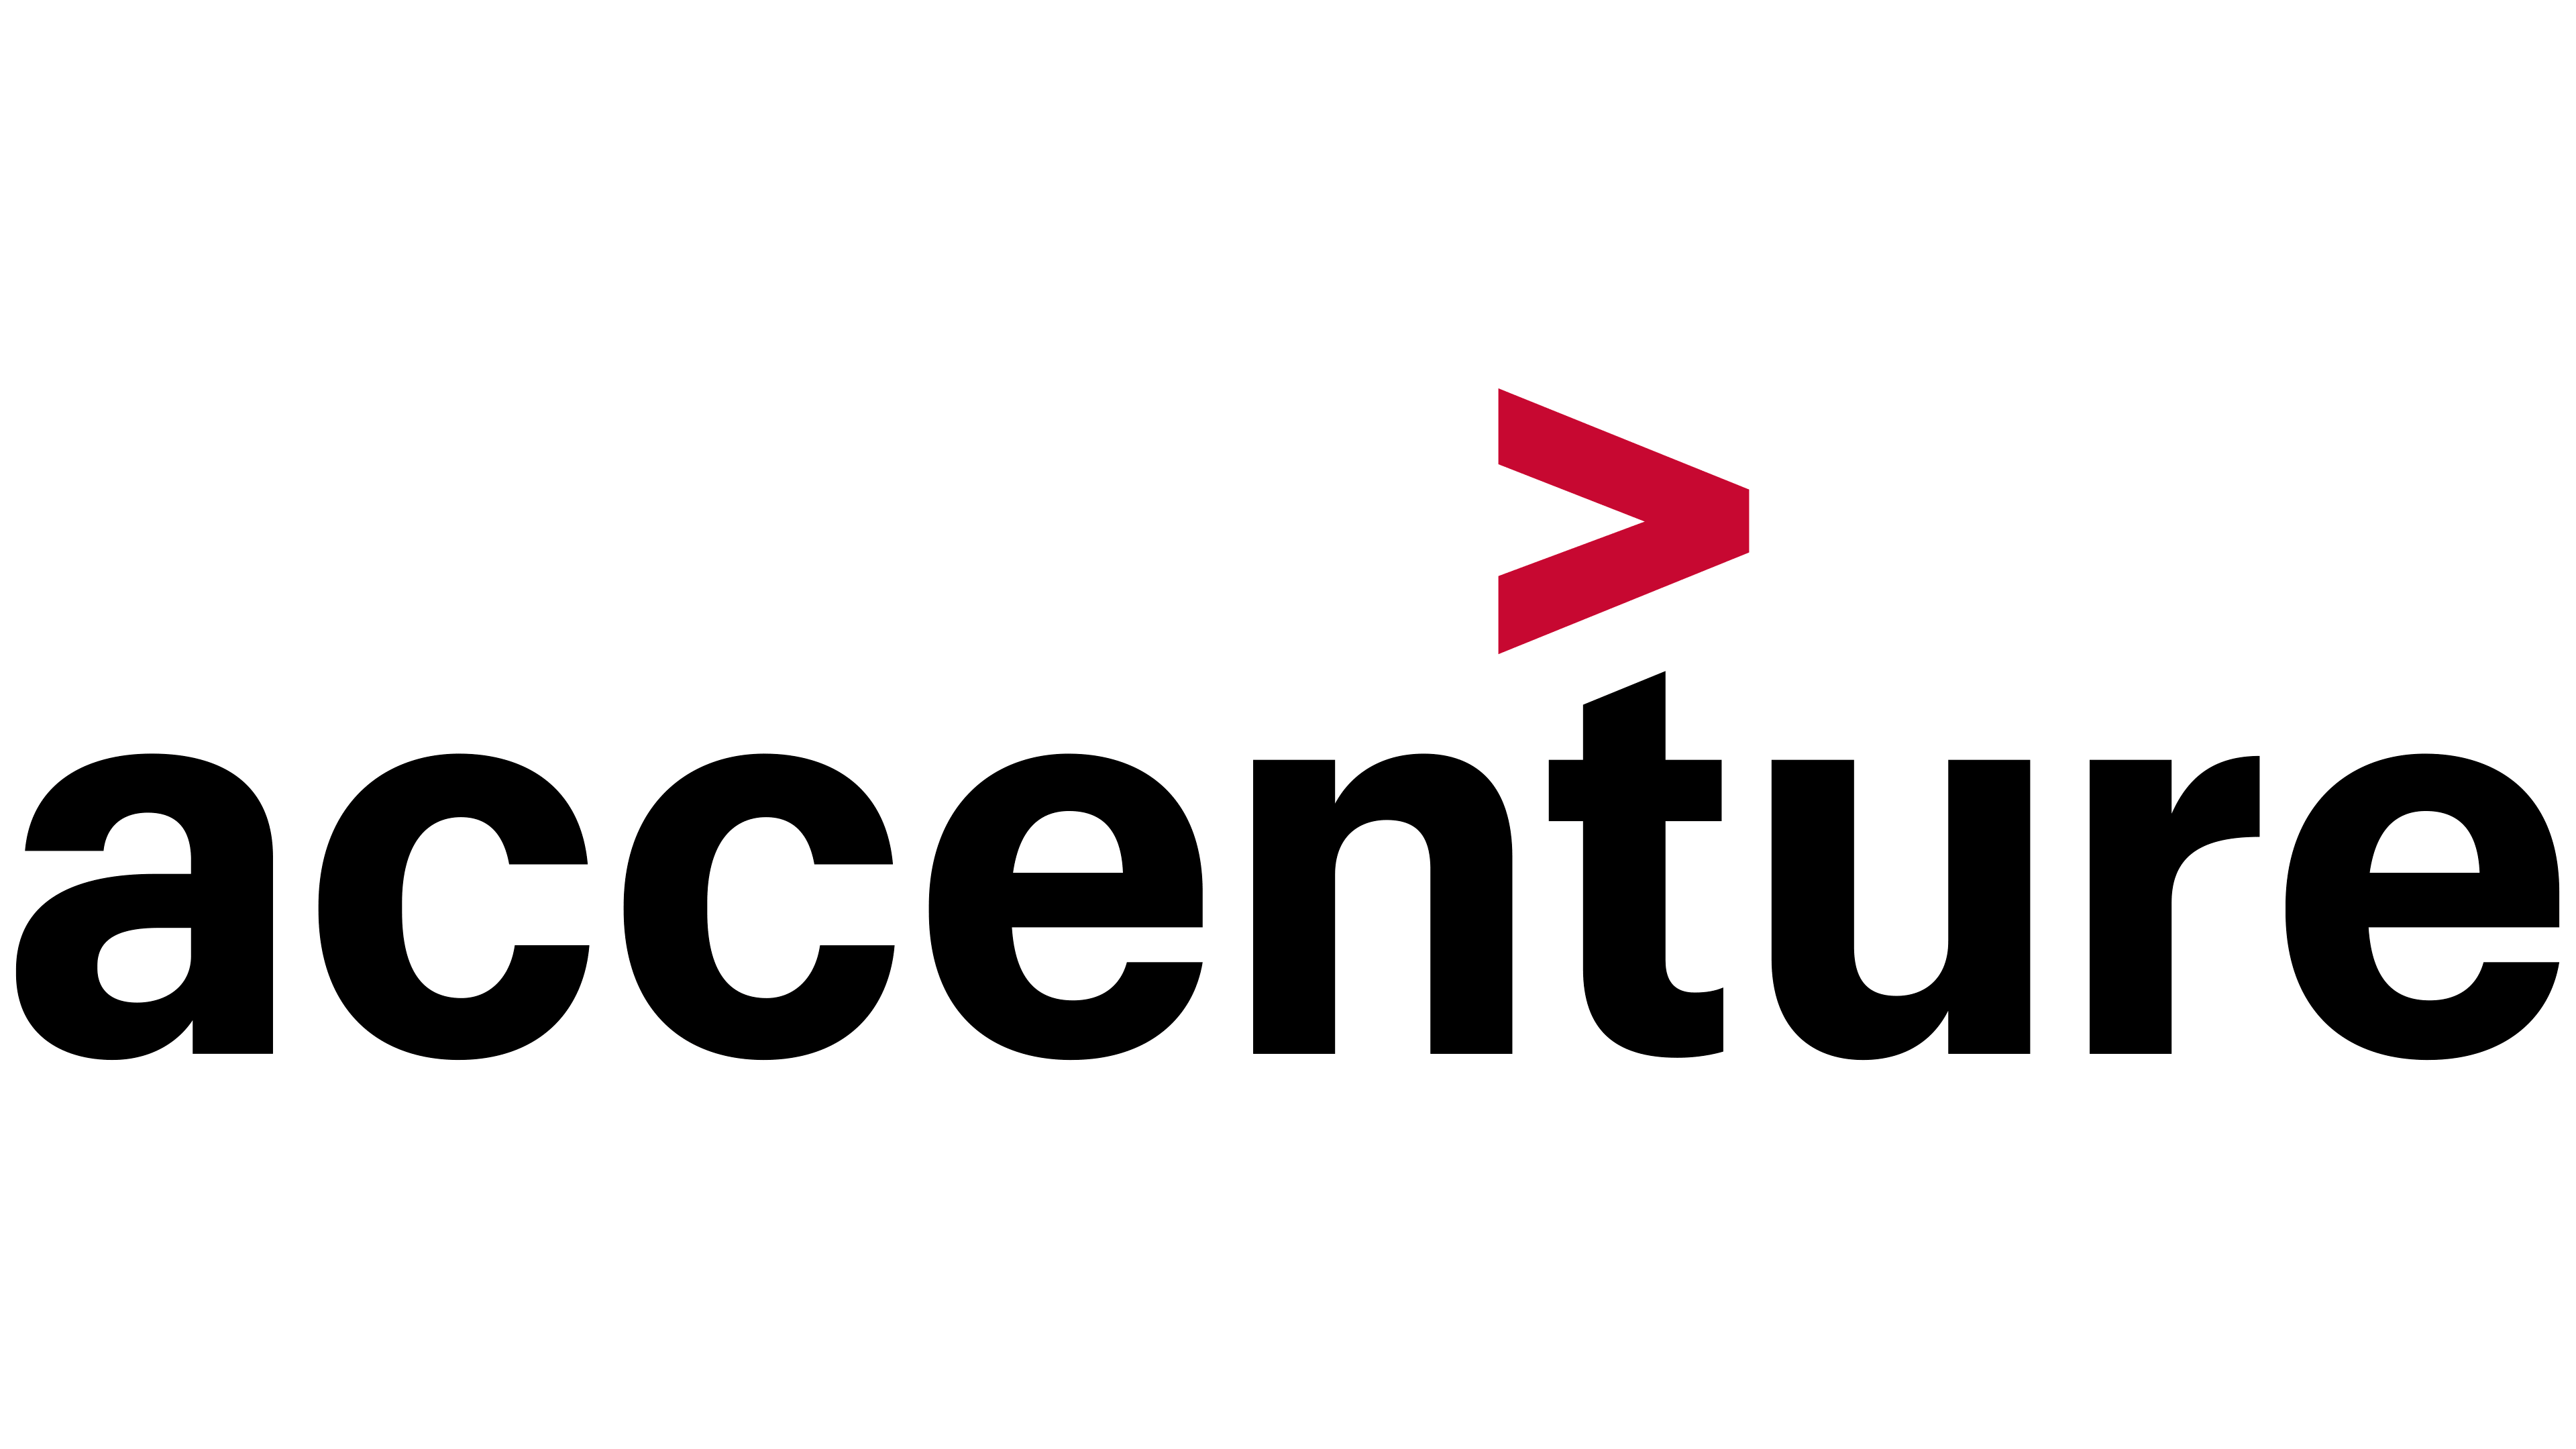 accenture-logo-about-us-image